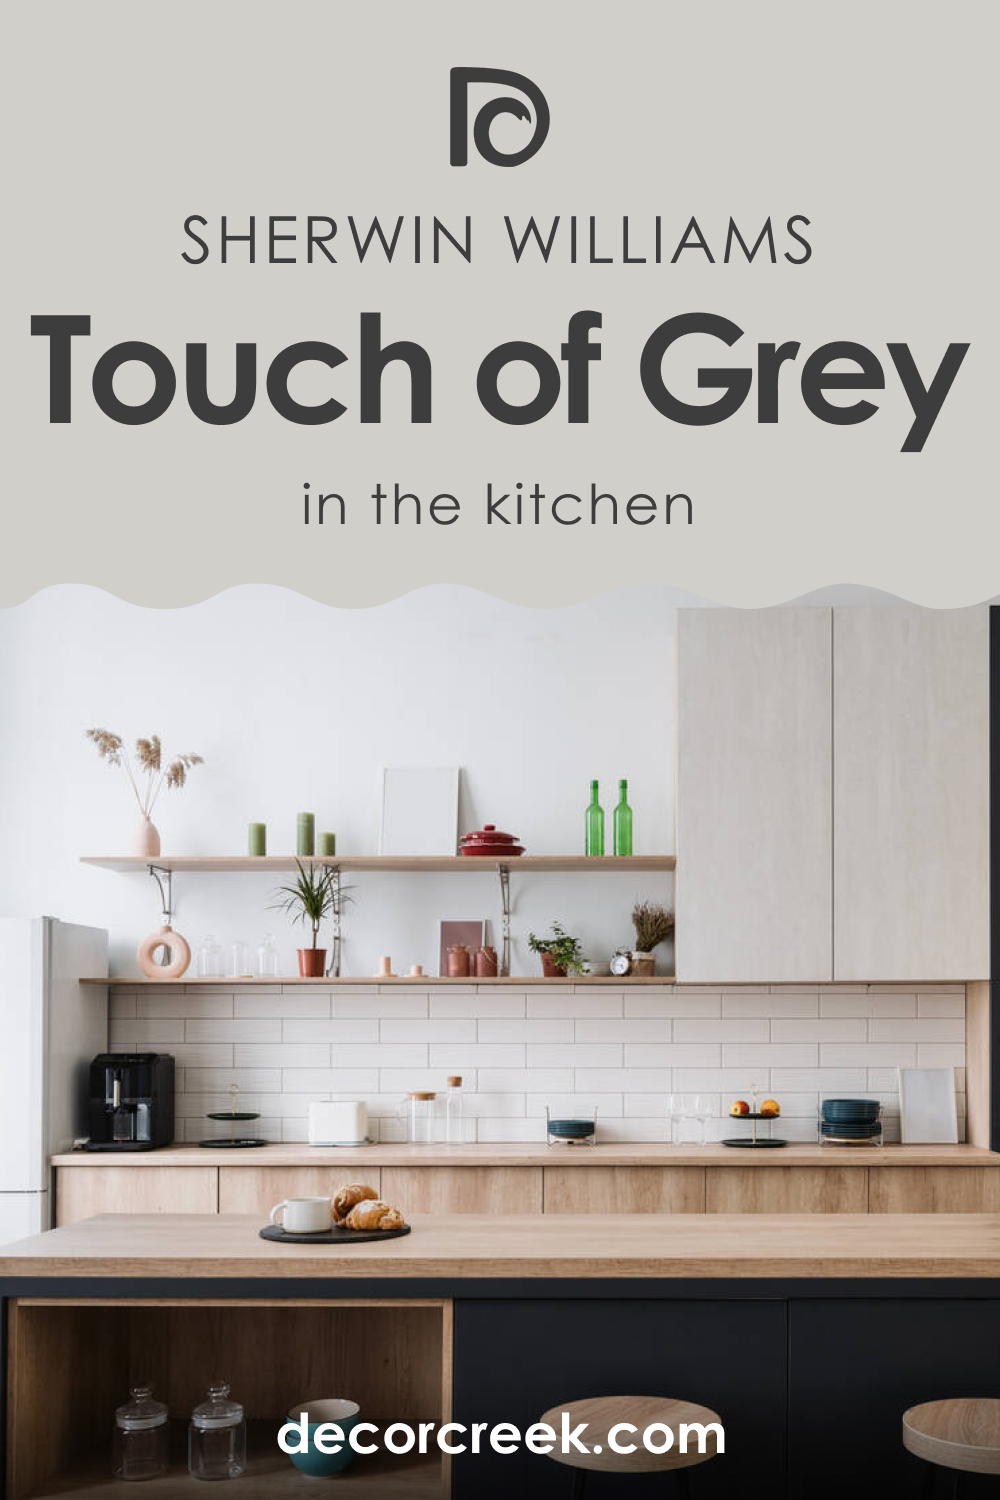 How to Use SW 9549 Touch of Grey for the Kitchen?